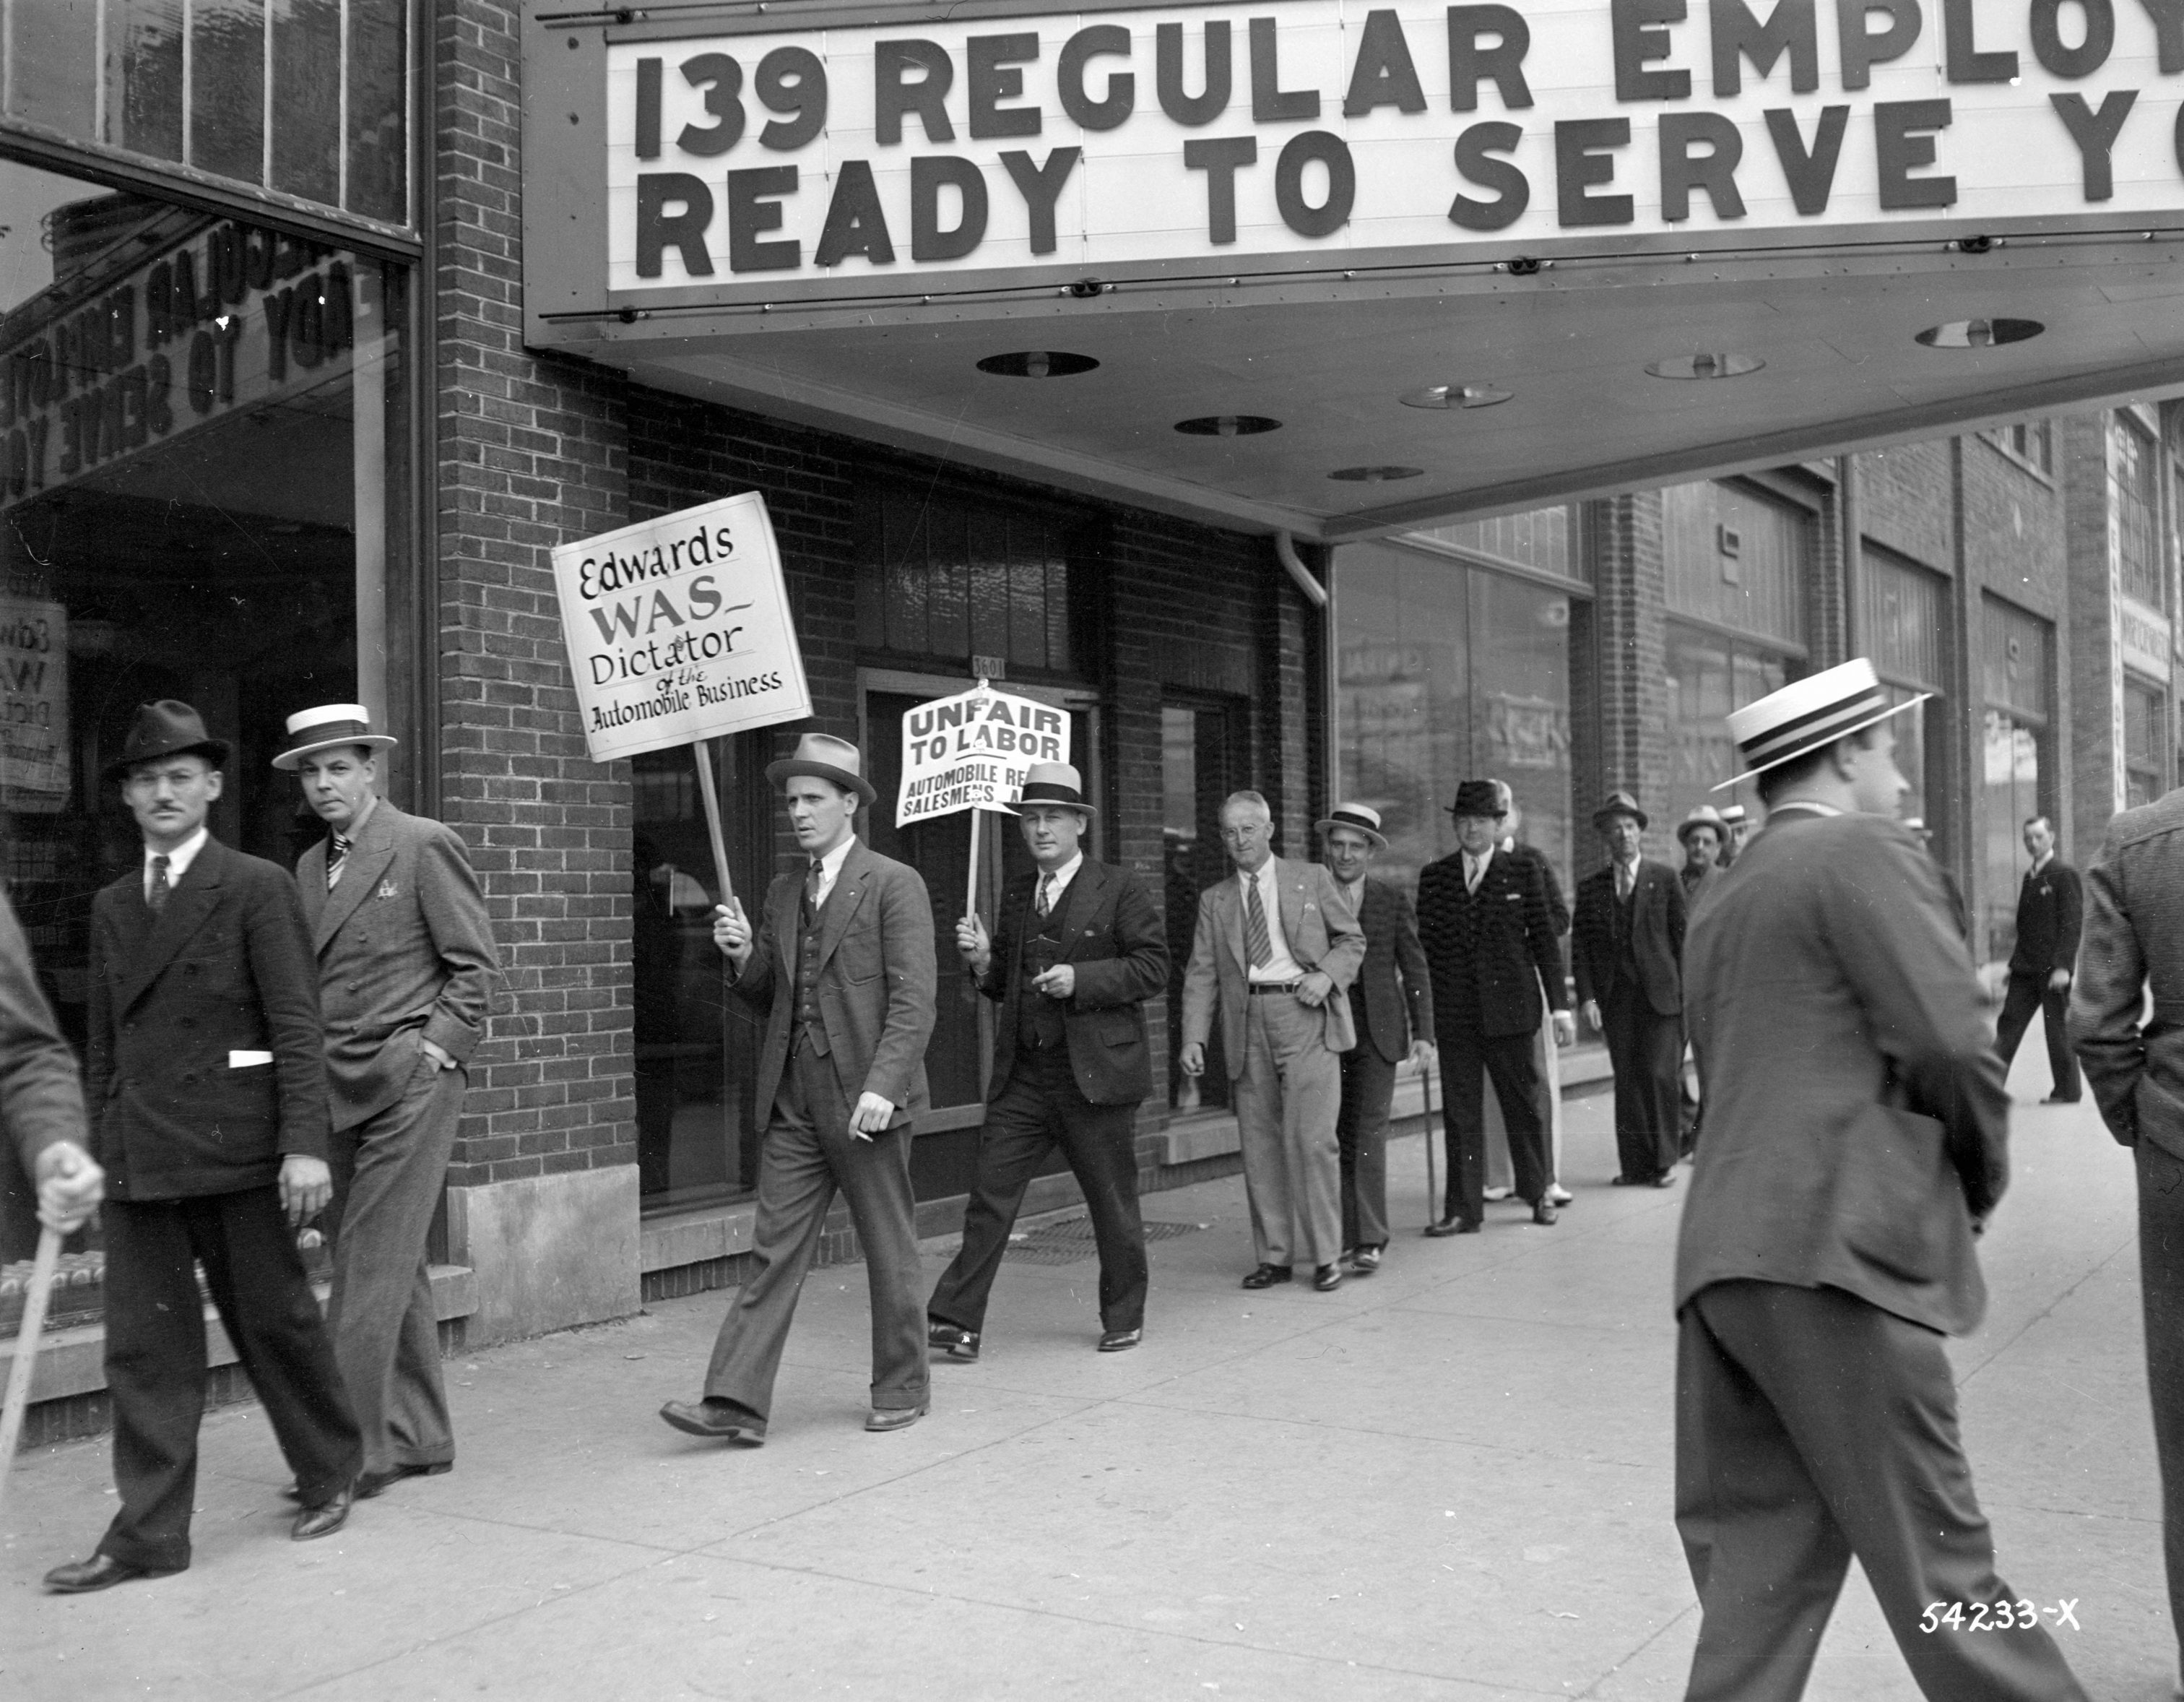 A group of workers from the Edwards Motor Company picket with strike signs on Wisconsin Avenue in 1937.